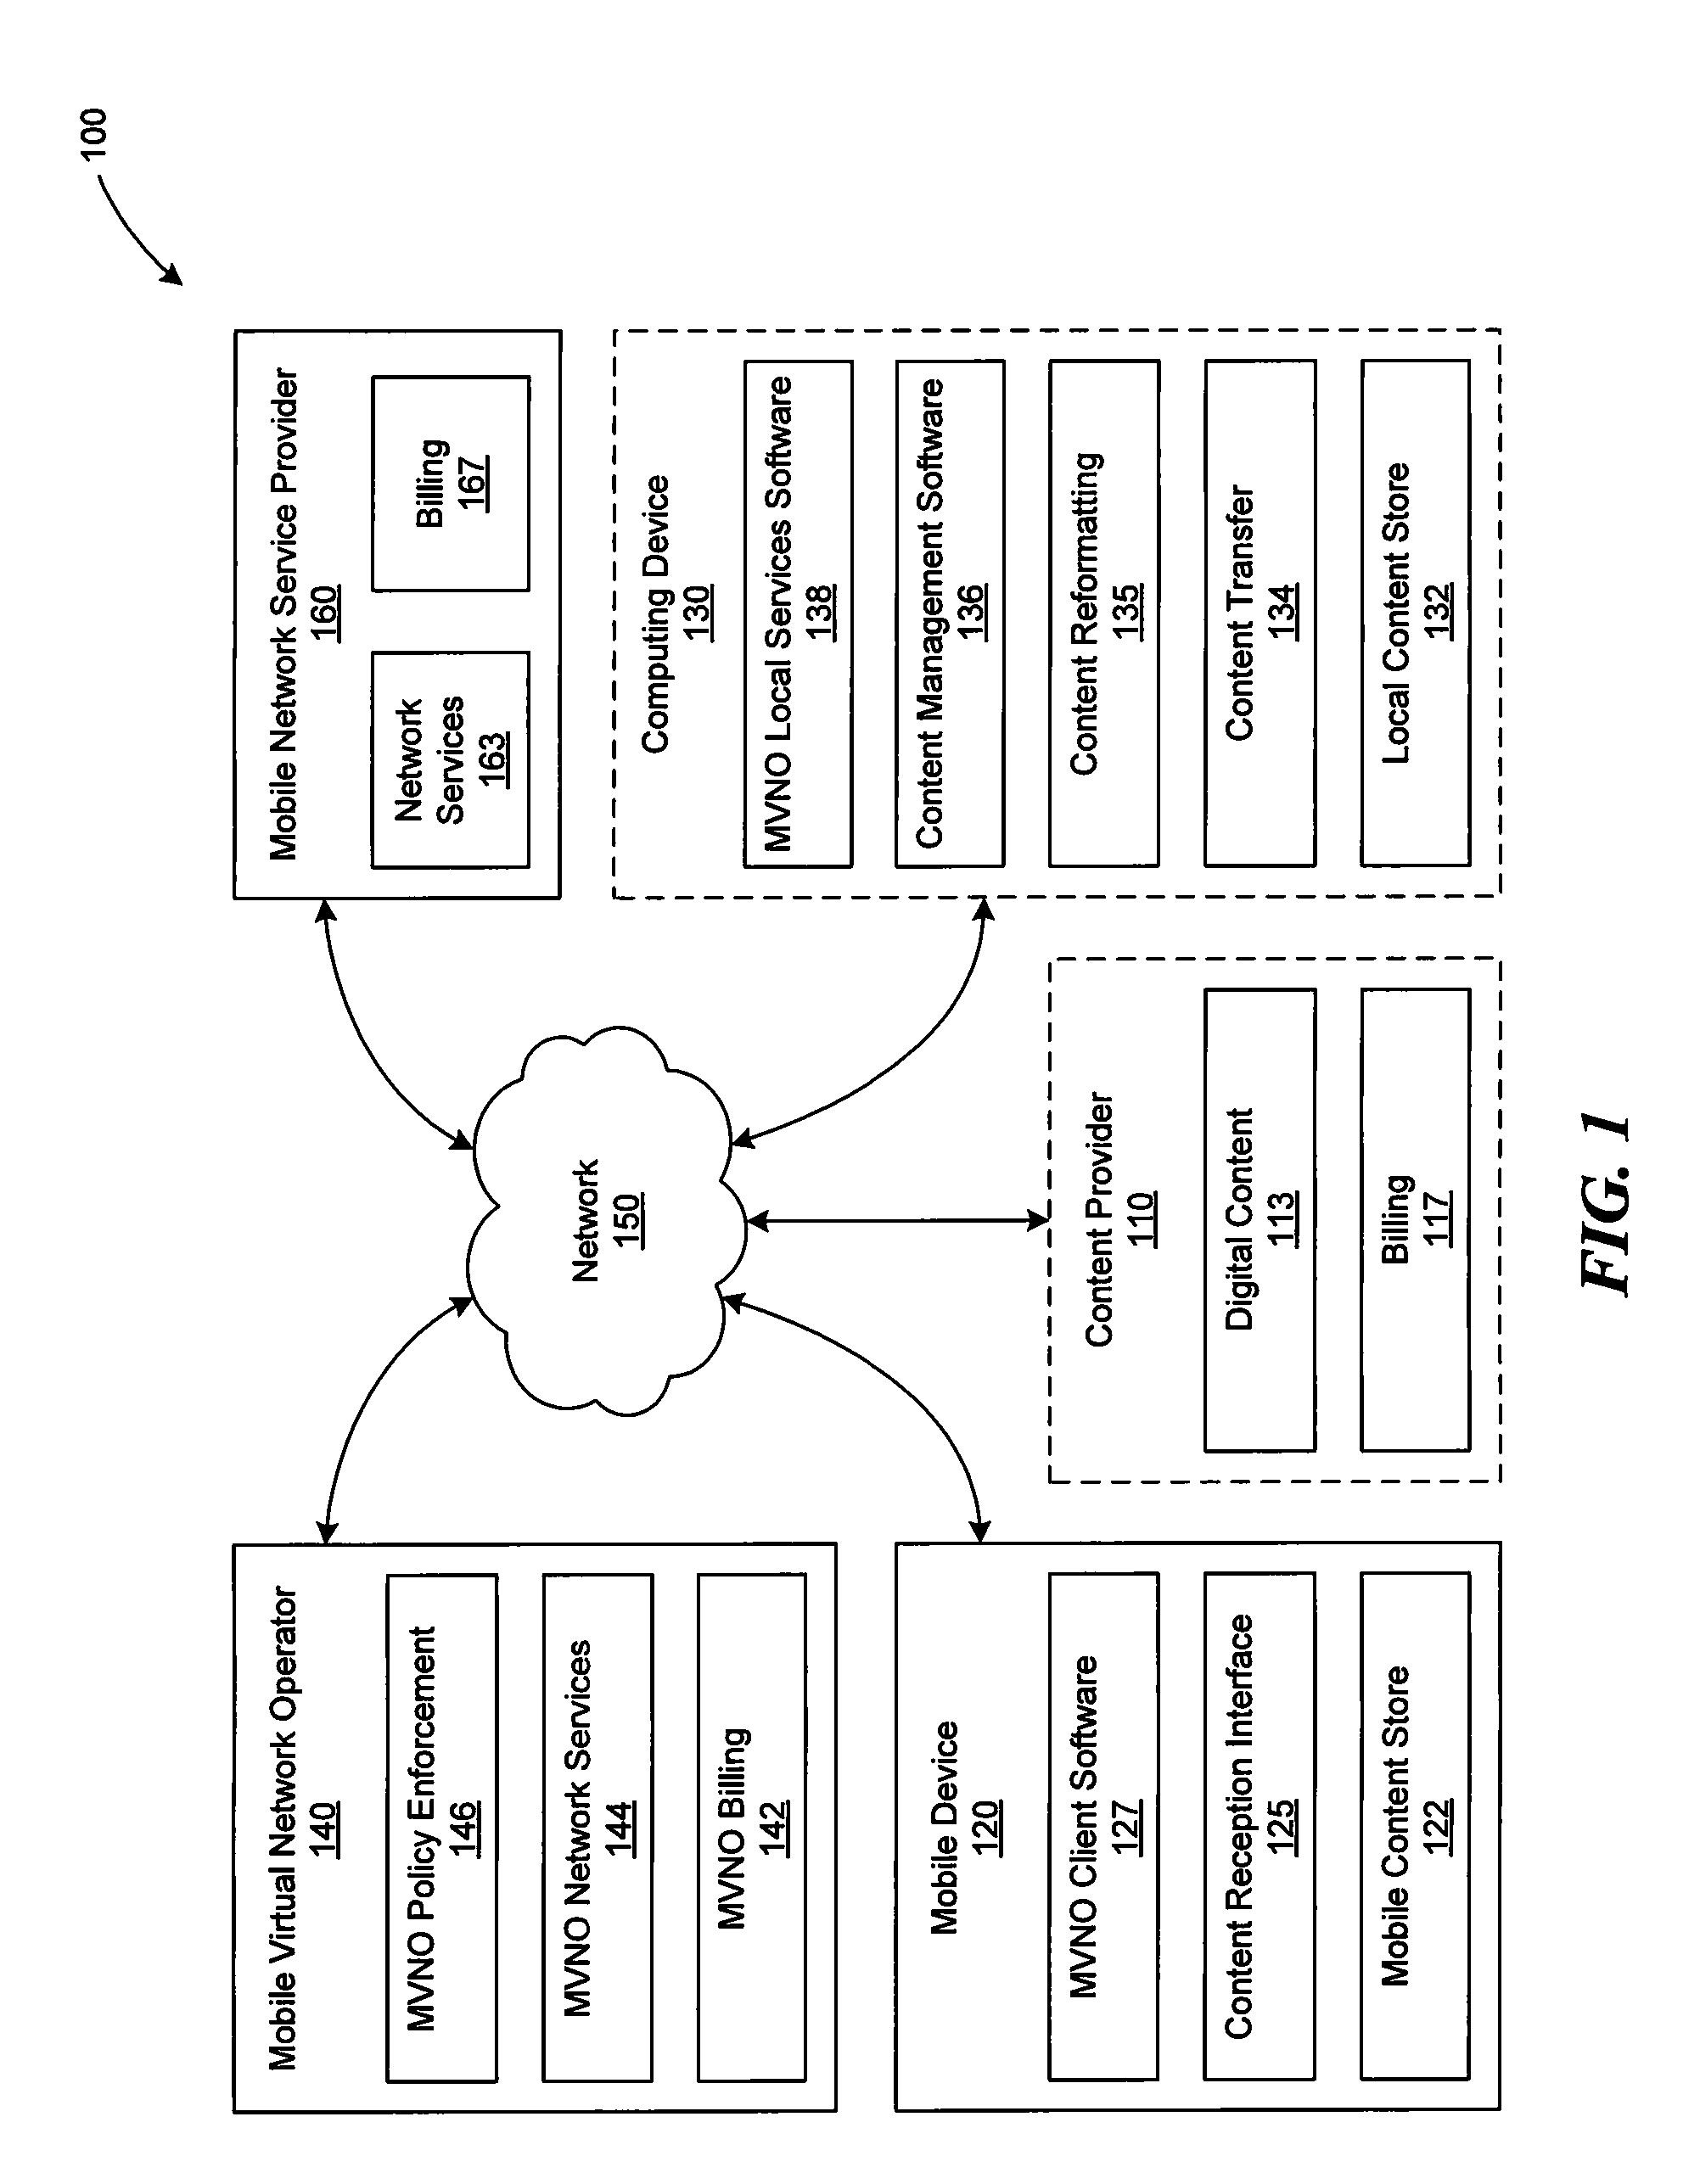 System and method for providing a network service in a distributed fashion to a mobile device